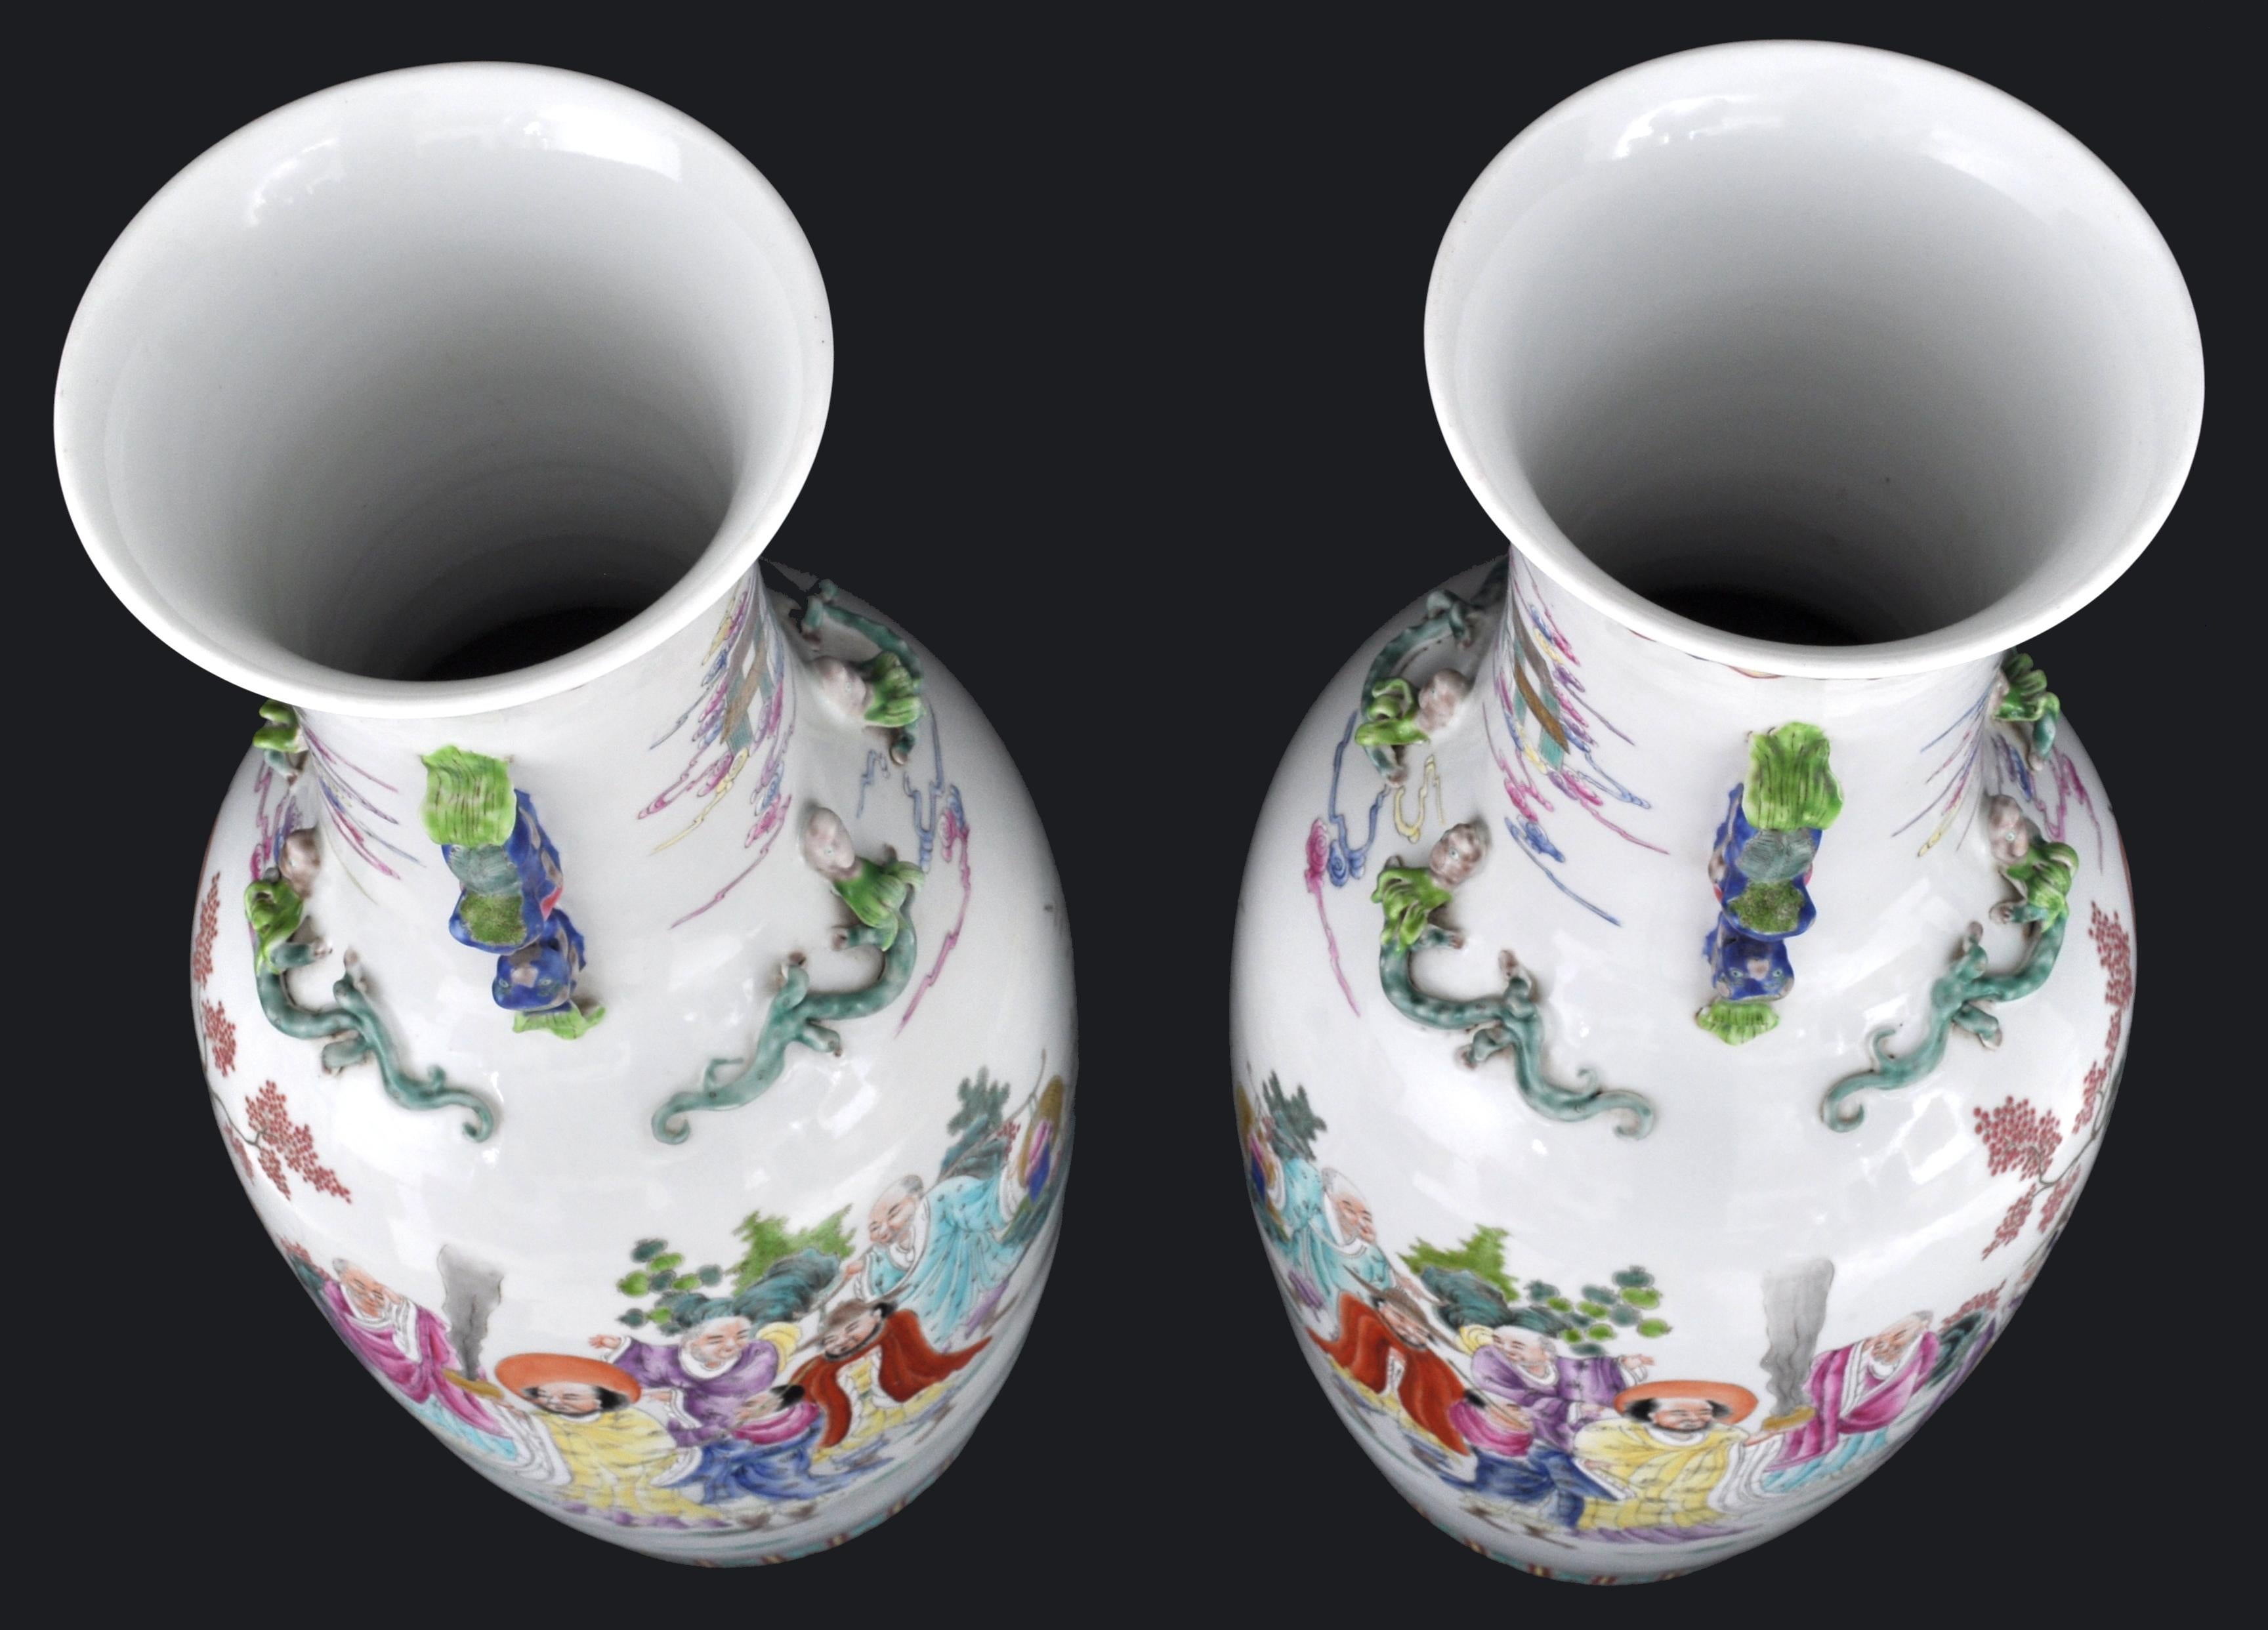 Monumental Pair of Antique Chinese Qing Dynasty Famille Rose Porcelain Vases For Sale 5